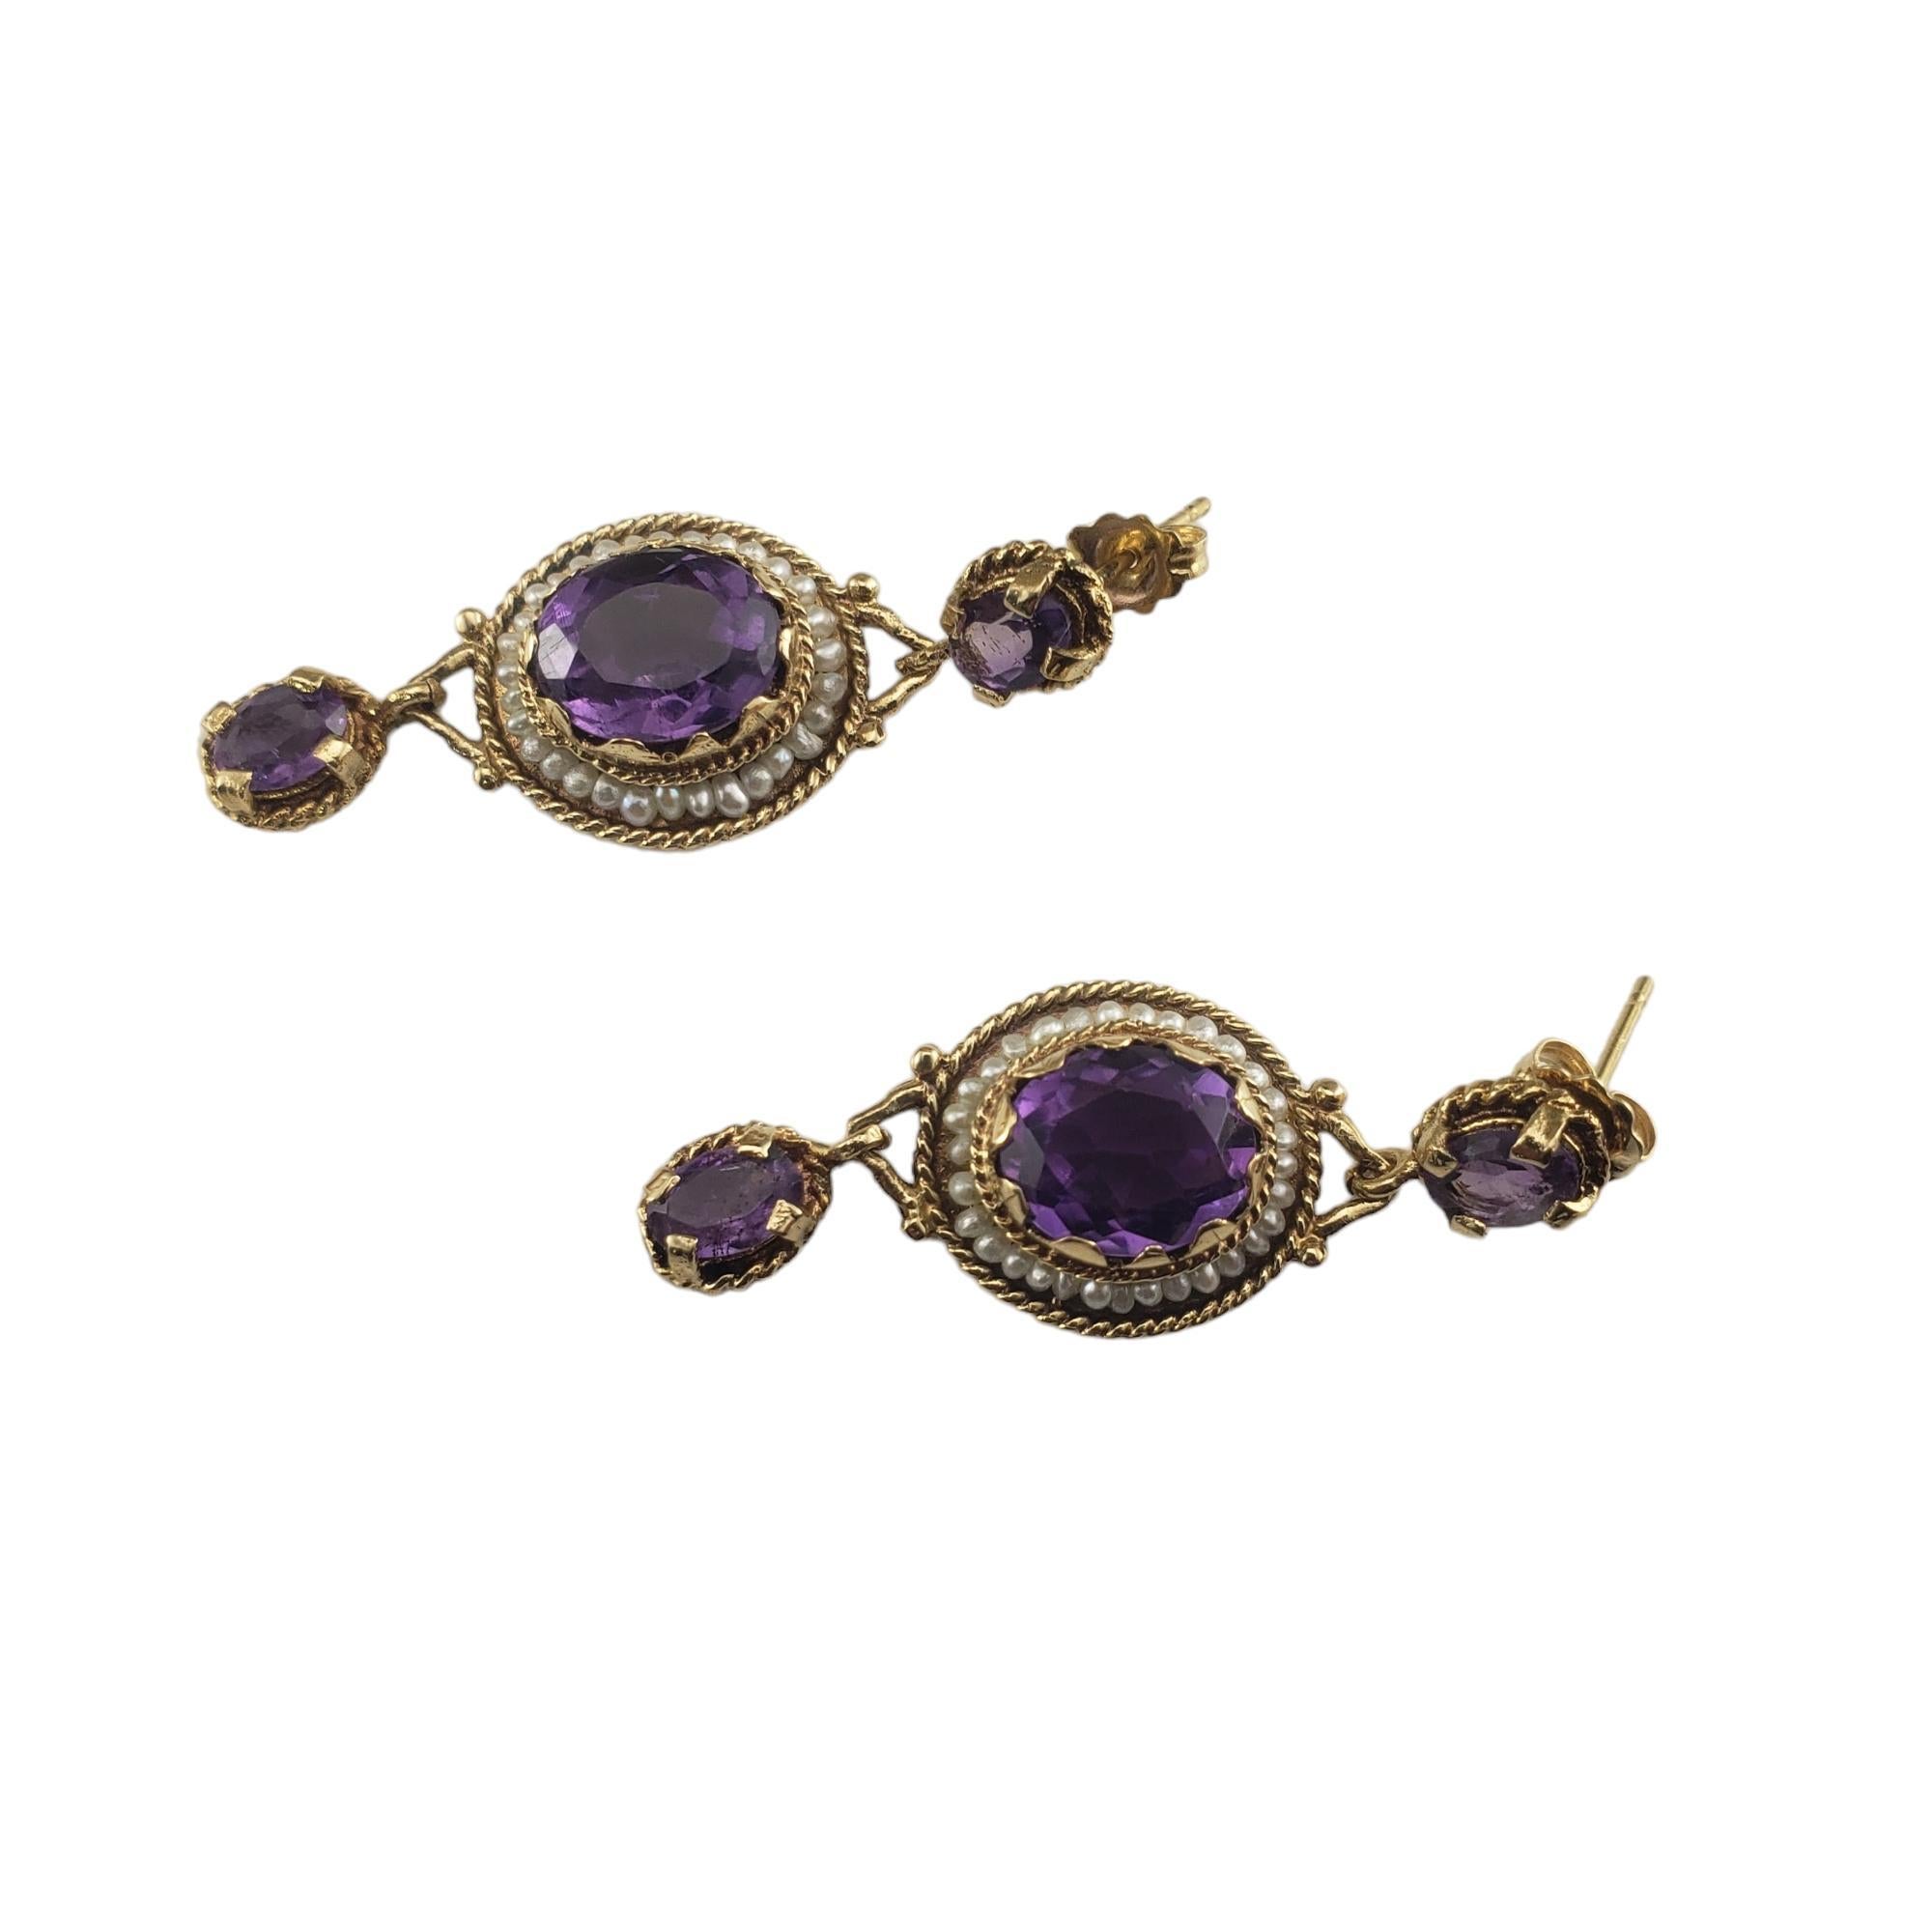 Vintage 14K Yellow Gold Amethyst and Seed Pearl Earrings Lab Certified-

These lovely dangle earrings each features three oval amethyst gemstones and 31 seed pearls set in classic 14K yellow gold.  Push back closures.  

Total amethyst weight:  6.36